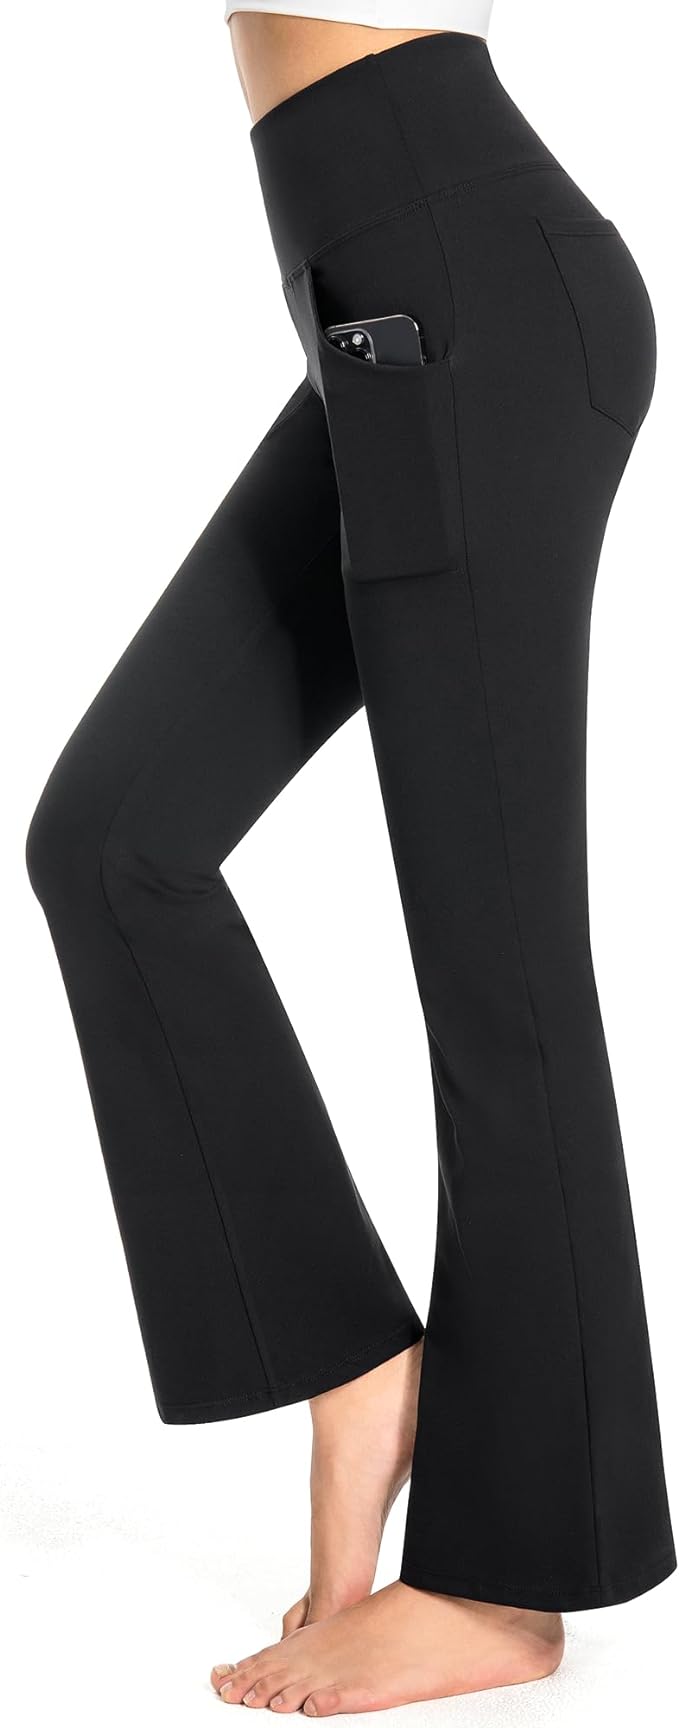 GymCope Flare Leggings for Women, High Waist Bootcut Yoga Pants with 4  Pockets, Tummy Control and Non-See-Through Dress Pants